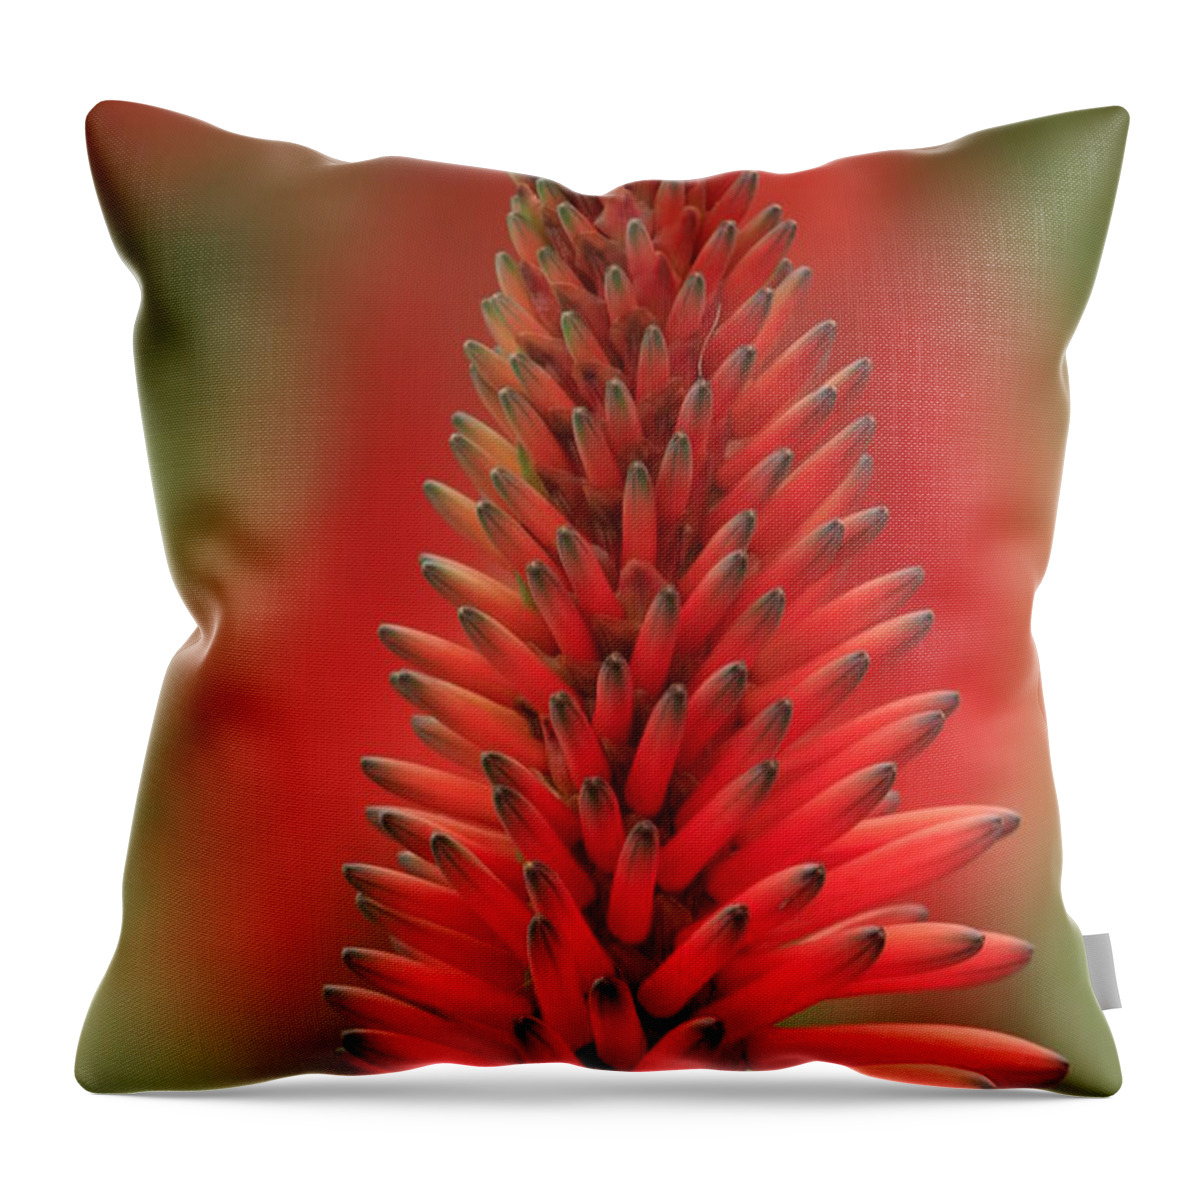 Floral Throw Pillow featuring the photograph La Jolla Floral by John F Tsumas